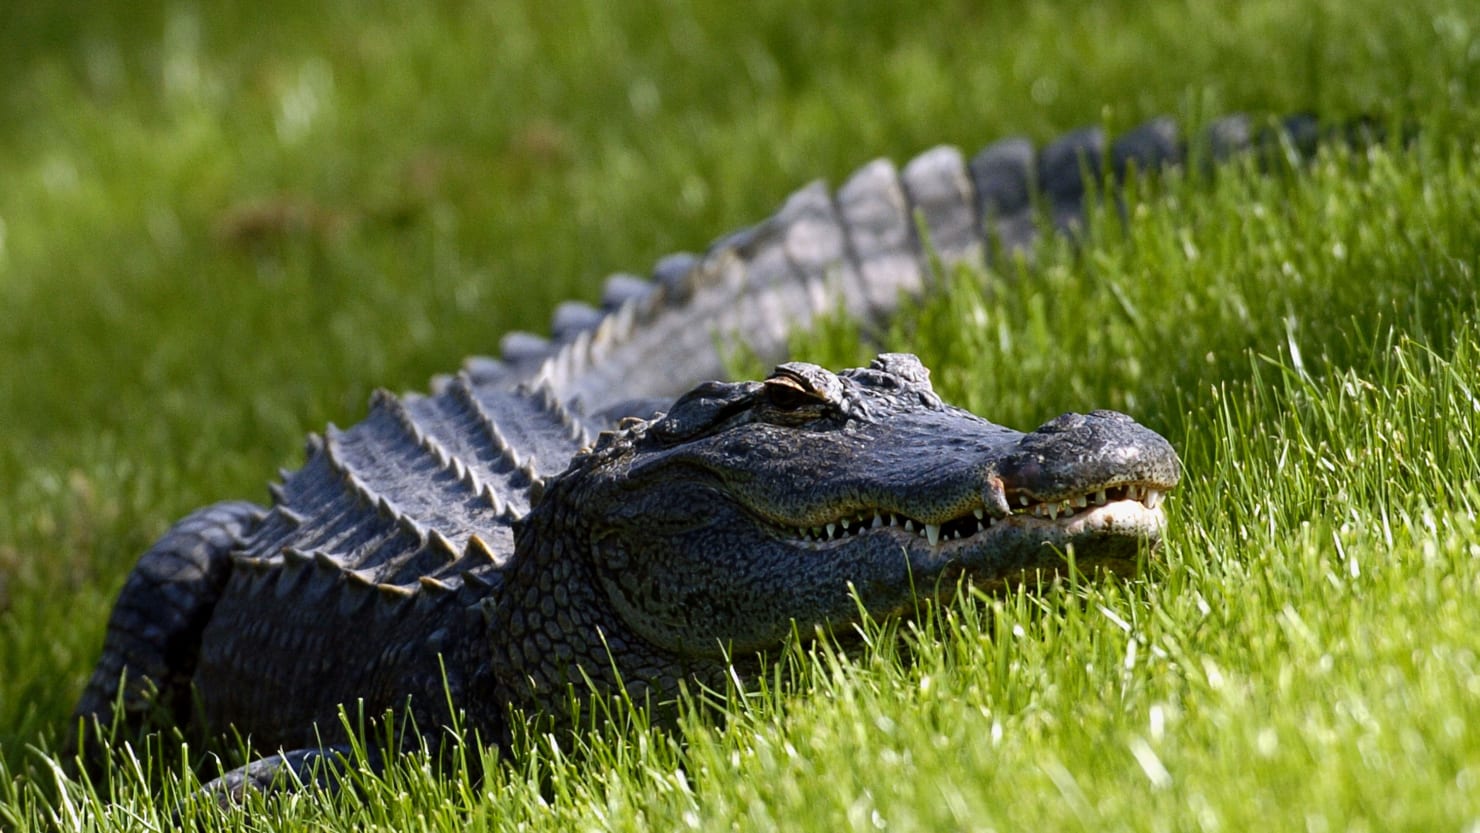 Florida Man Dies After Crashing Car Into 11-Foot Alligator – The Daily Beast